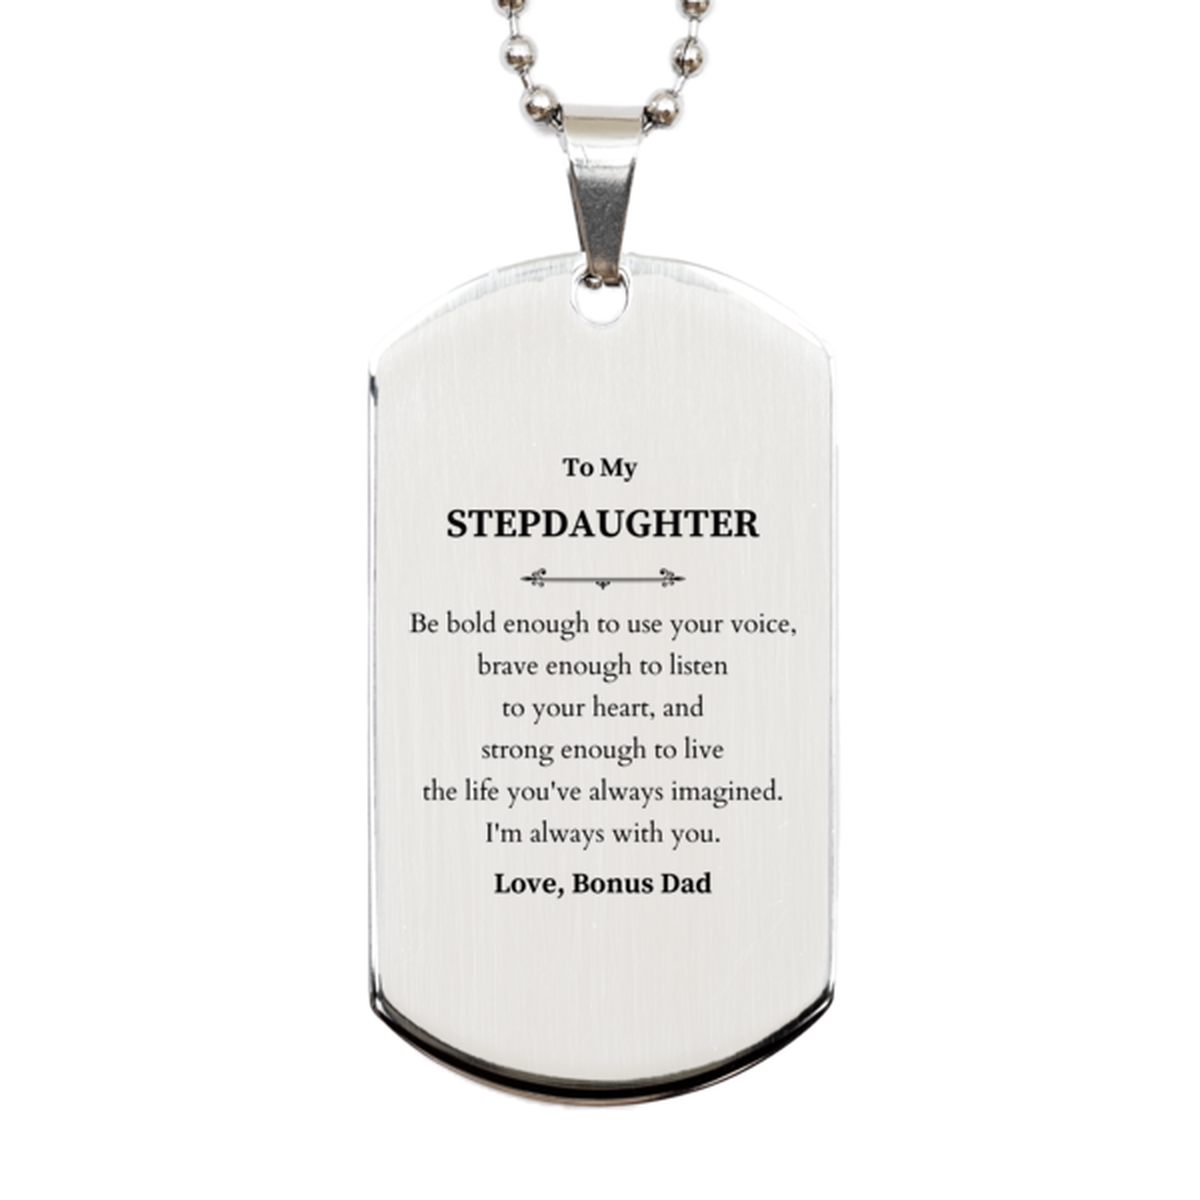 Keepsake Stepdaughter Silver Dog Tag Gift Idea Graduation Christmas Birthday Stepdaughter from Bonus Dad, Stepdaughter Be bold enough to use your voice, brave enough to listen to your heart. Love, Bonus Dad